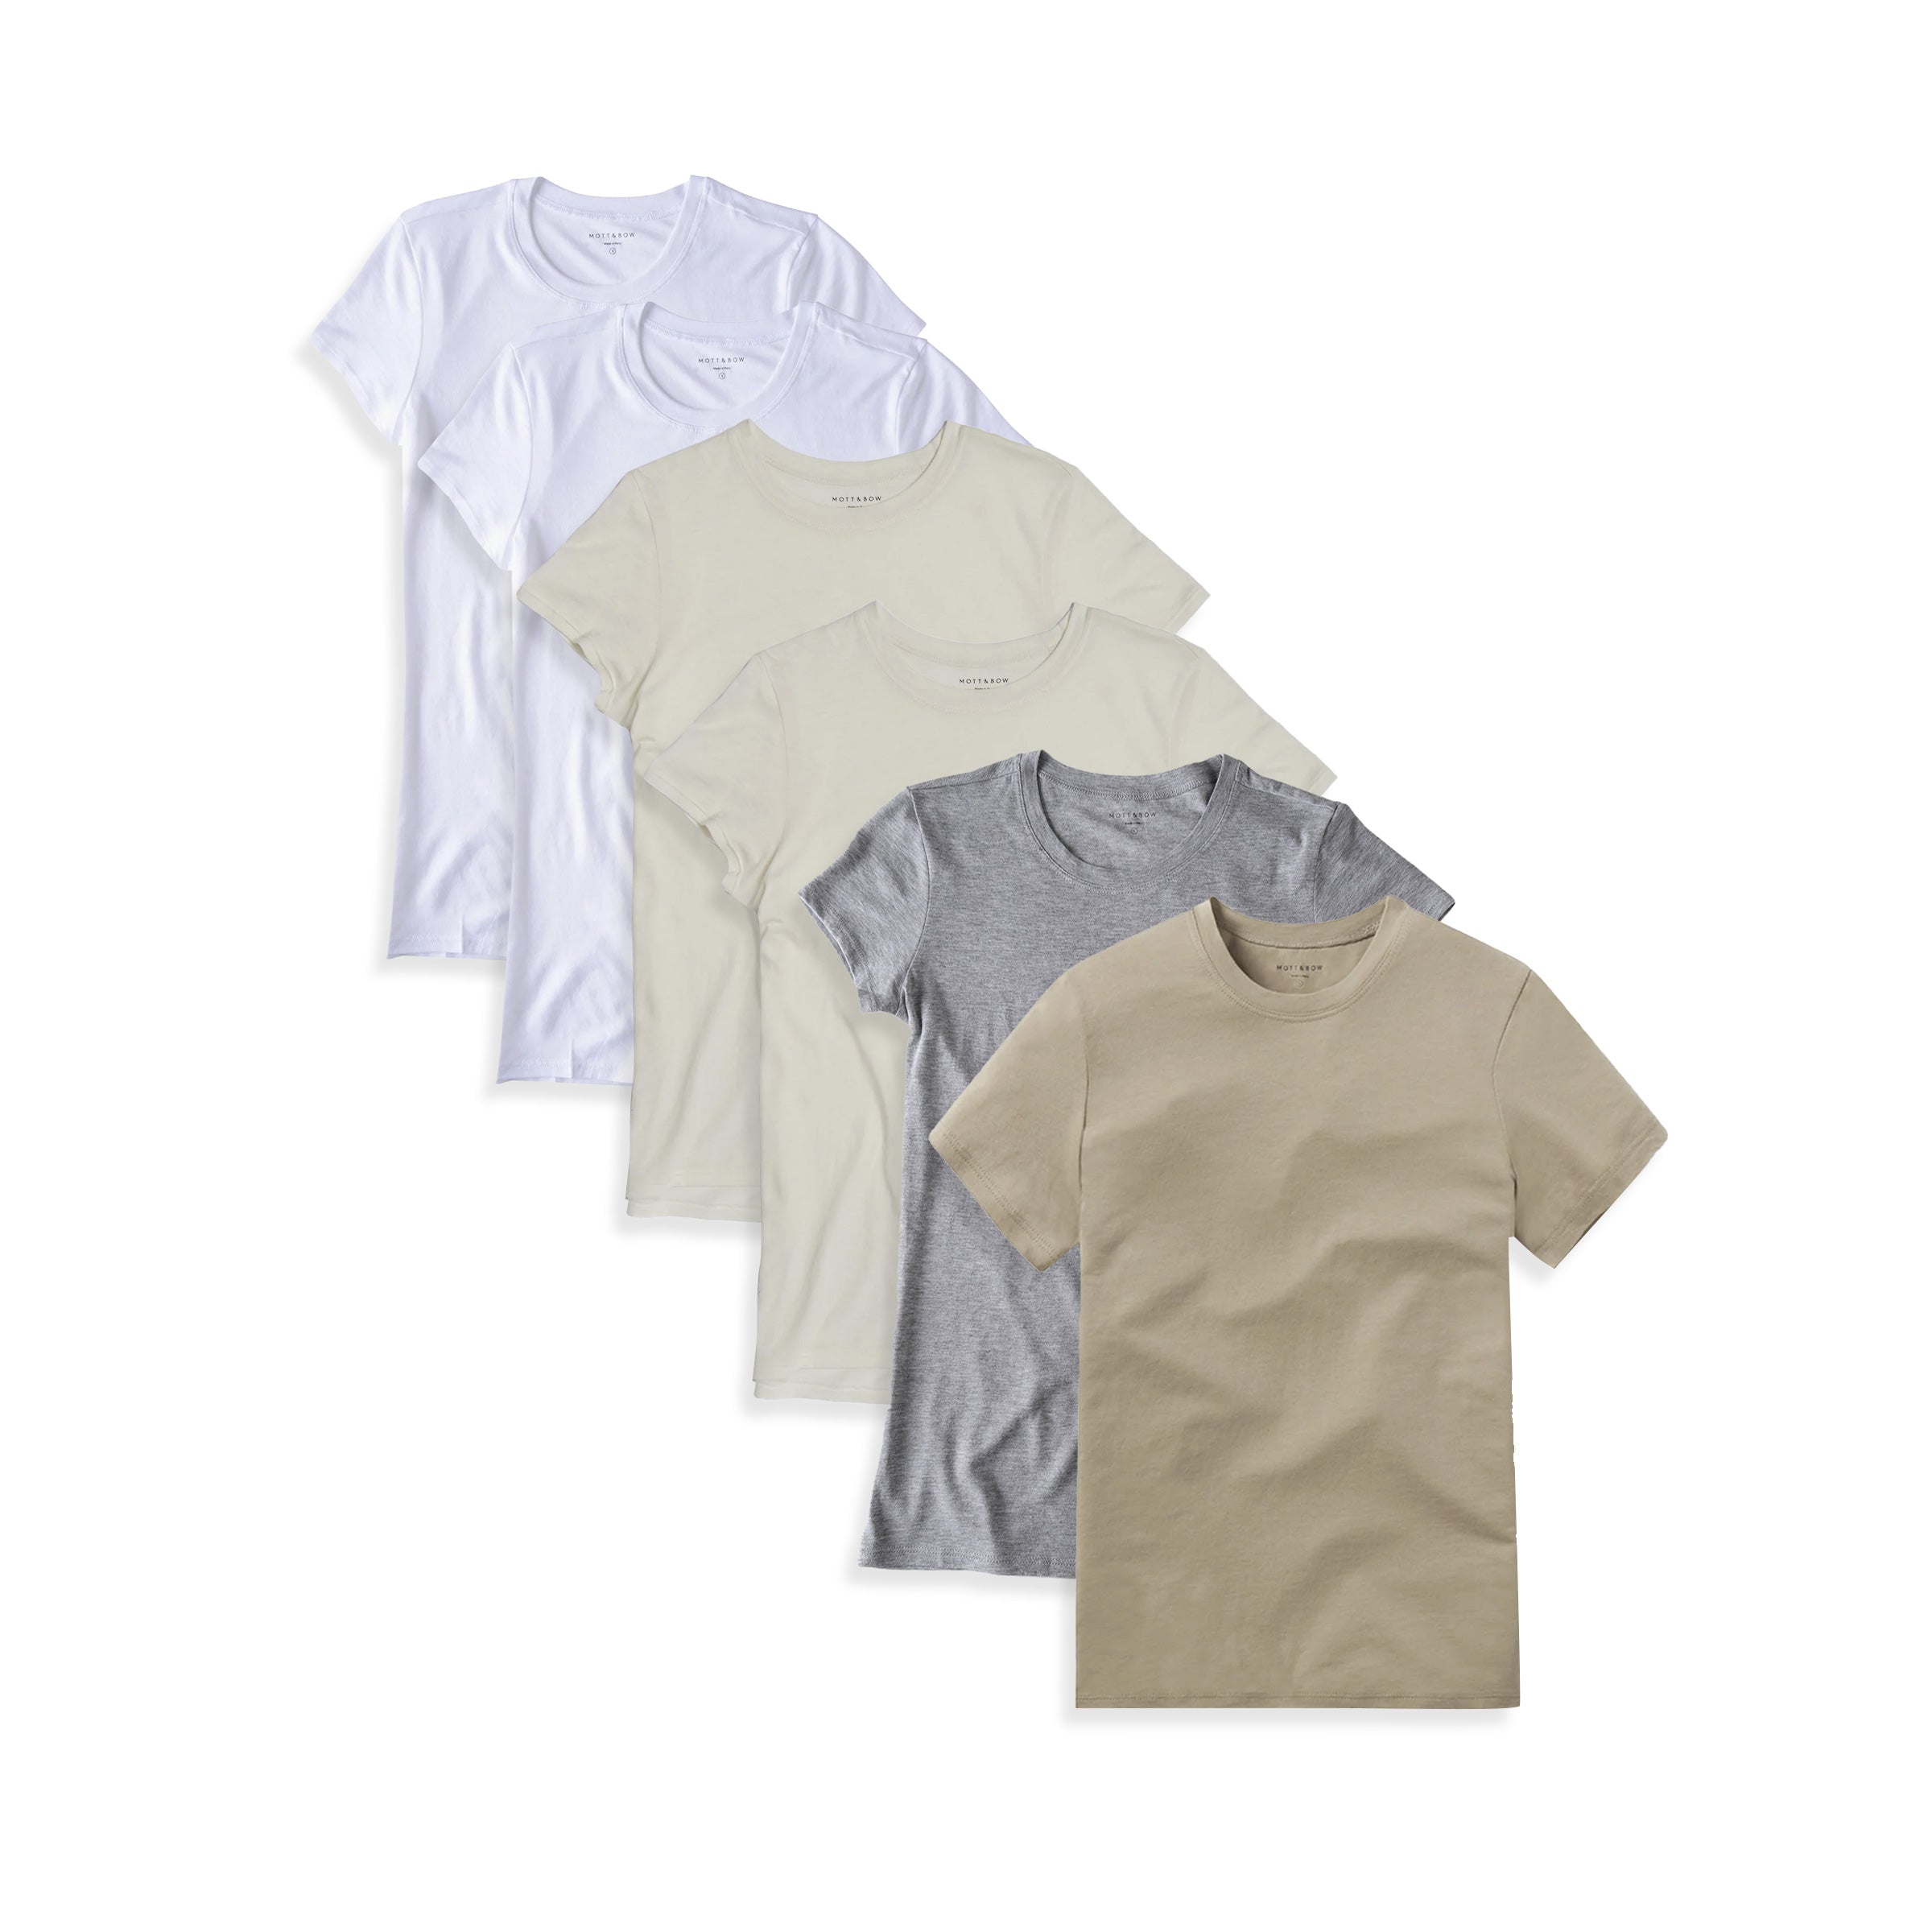 Women wearing White/Vintage White/Heather Gray/Olive Fitted Crew Marcy 6-Pack tees